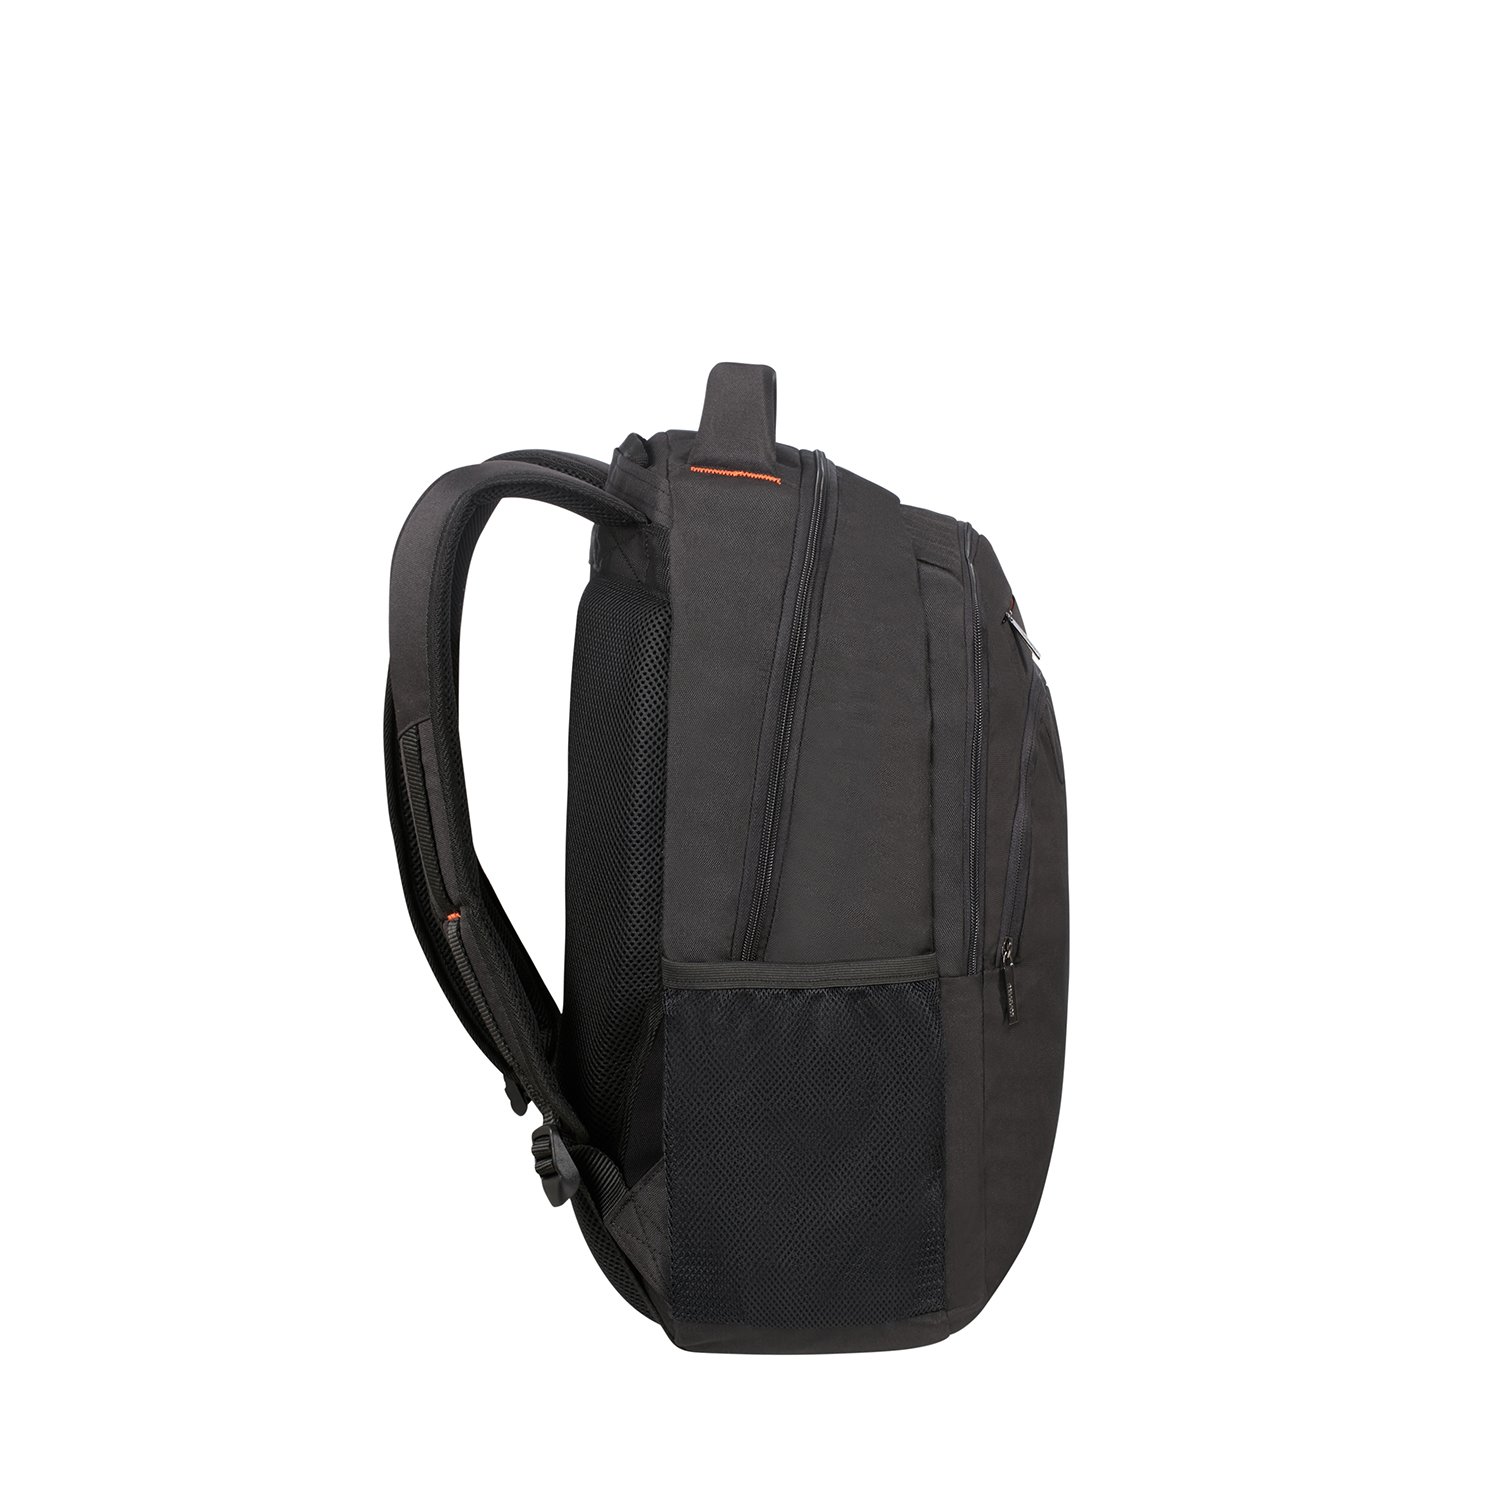 AT WORK-LAPTOP BACKPACK 17.3" S33G-003-SF000*39